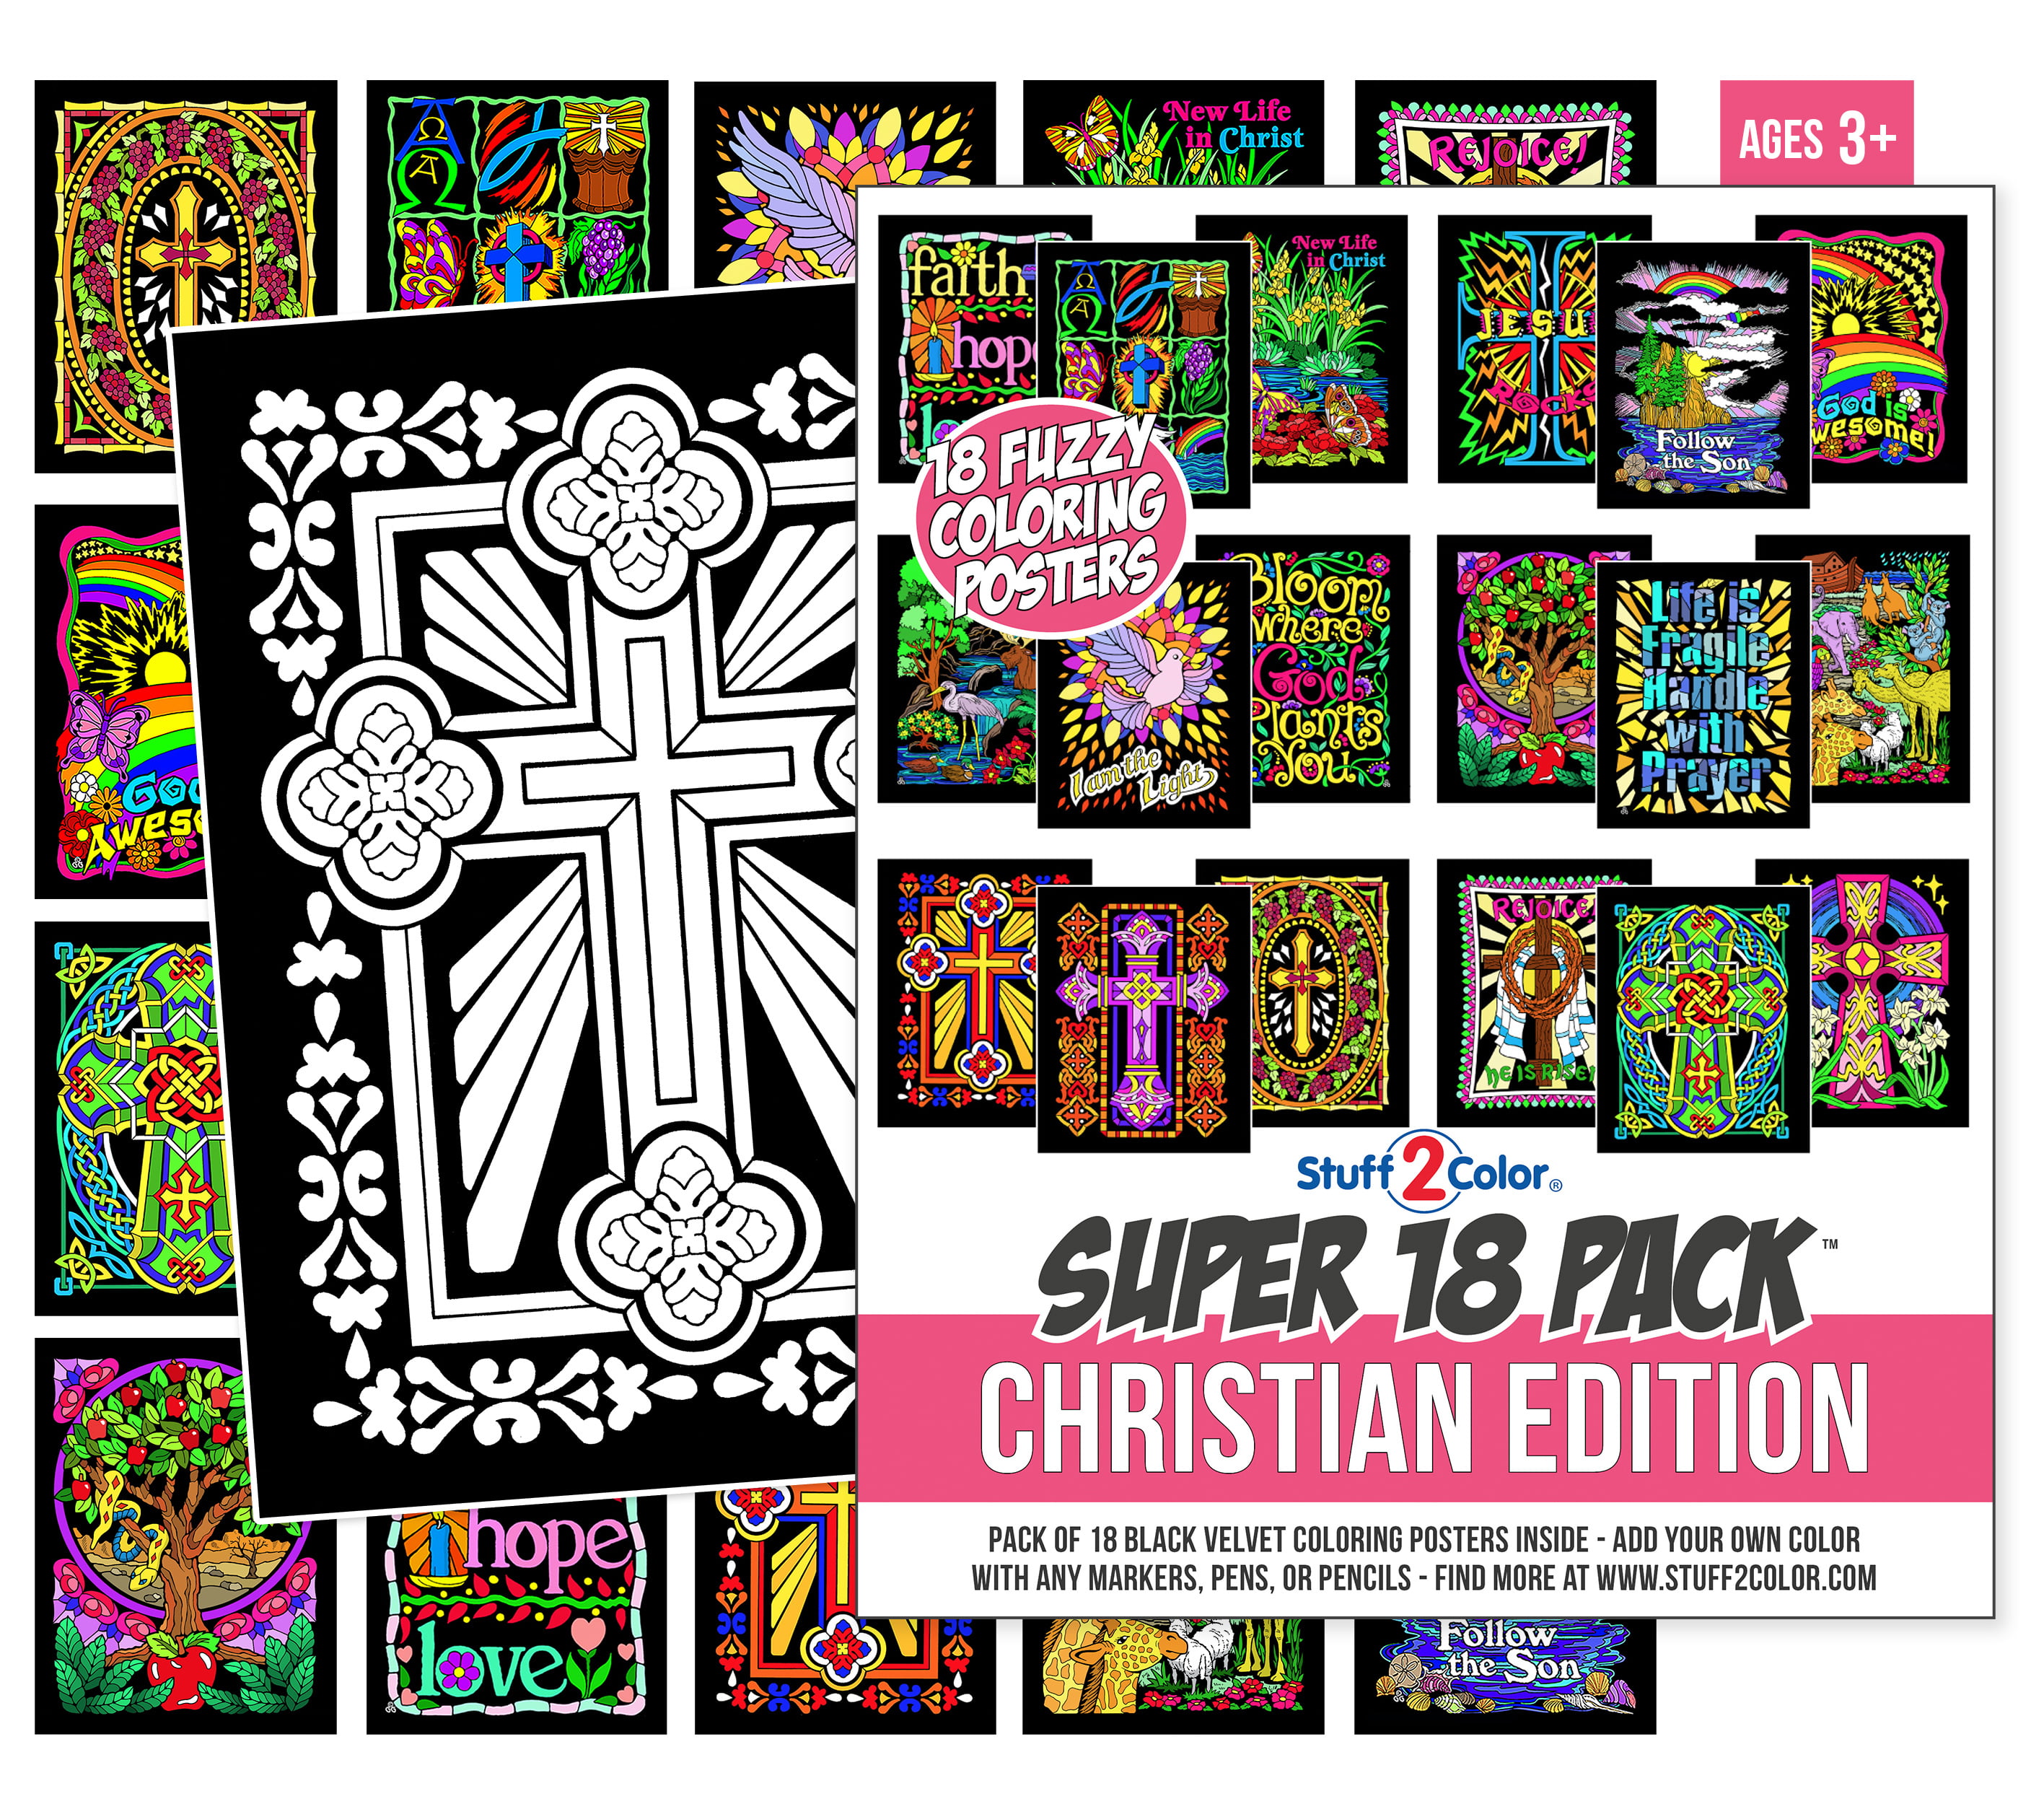 Super Pack of 18 Fuzzy Velvet Coloring Posters (Christian Edition) - Great  for Religious Gift, Kids Sunday School, Group Arts and Crafts Projects 